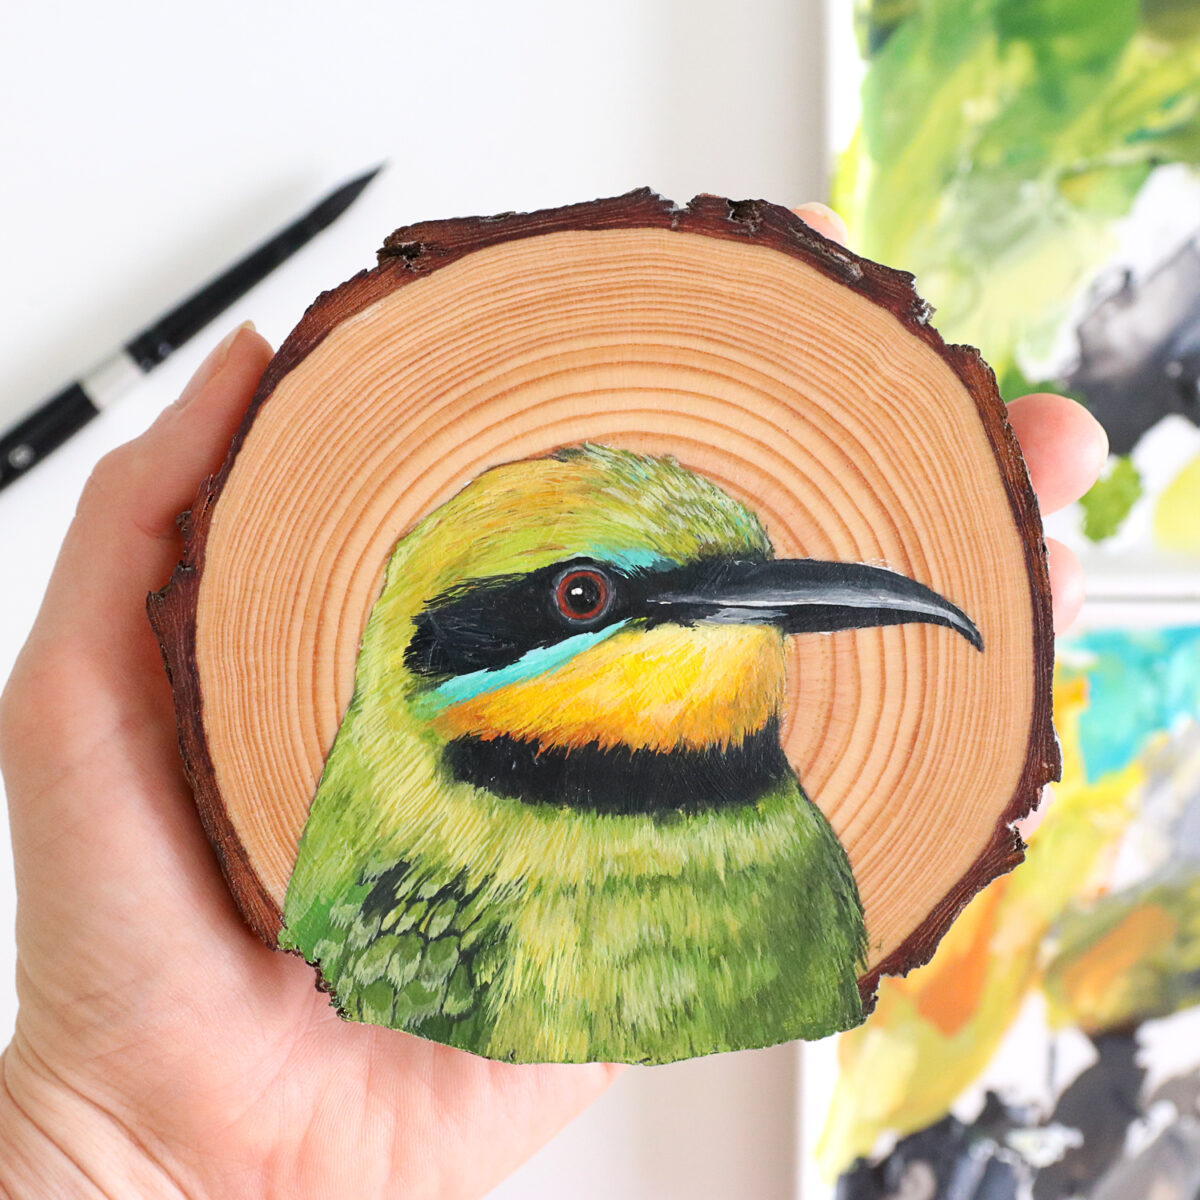 100 Days Of Birds A Marvelous Series Of Gouache On Wood Paintings By Deanna Maree (6)